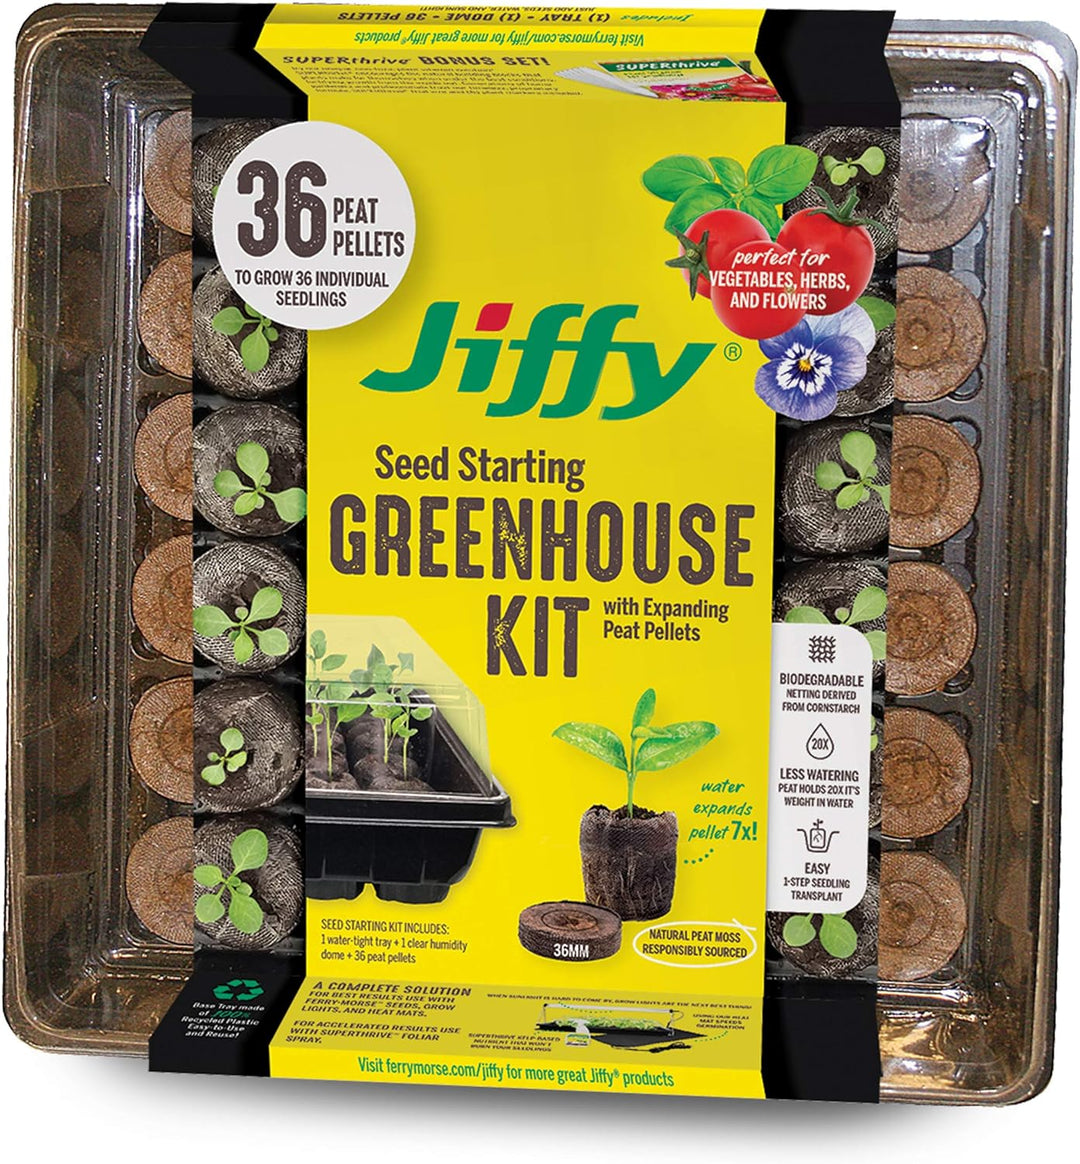 Jiffy Seed Starting Greenhouse with SUPERthrive & Labels 36mm